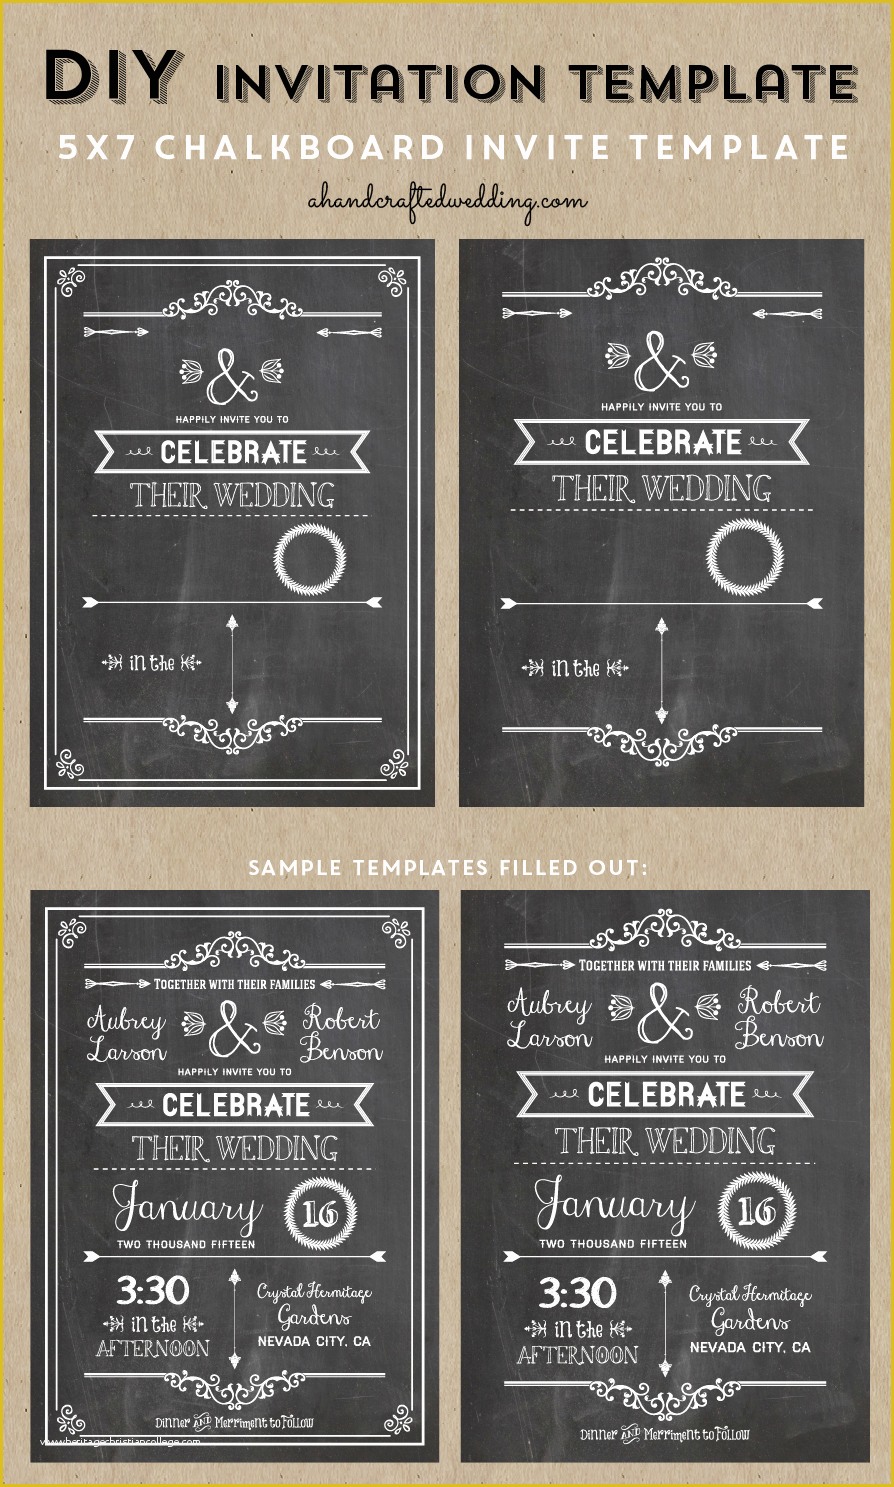 Chalkboard Invitation Template Free Of Check Out This Printable Diy Chalkboard Wedding Invitation